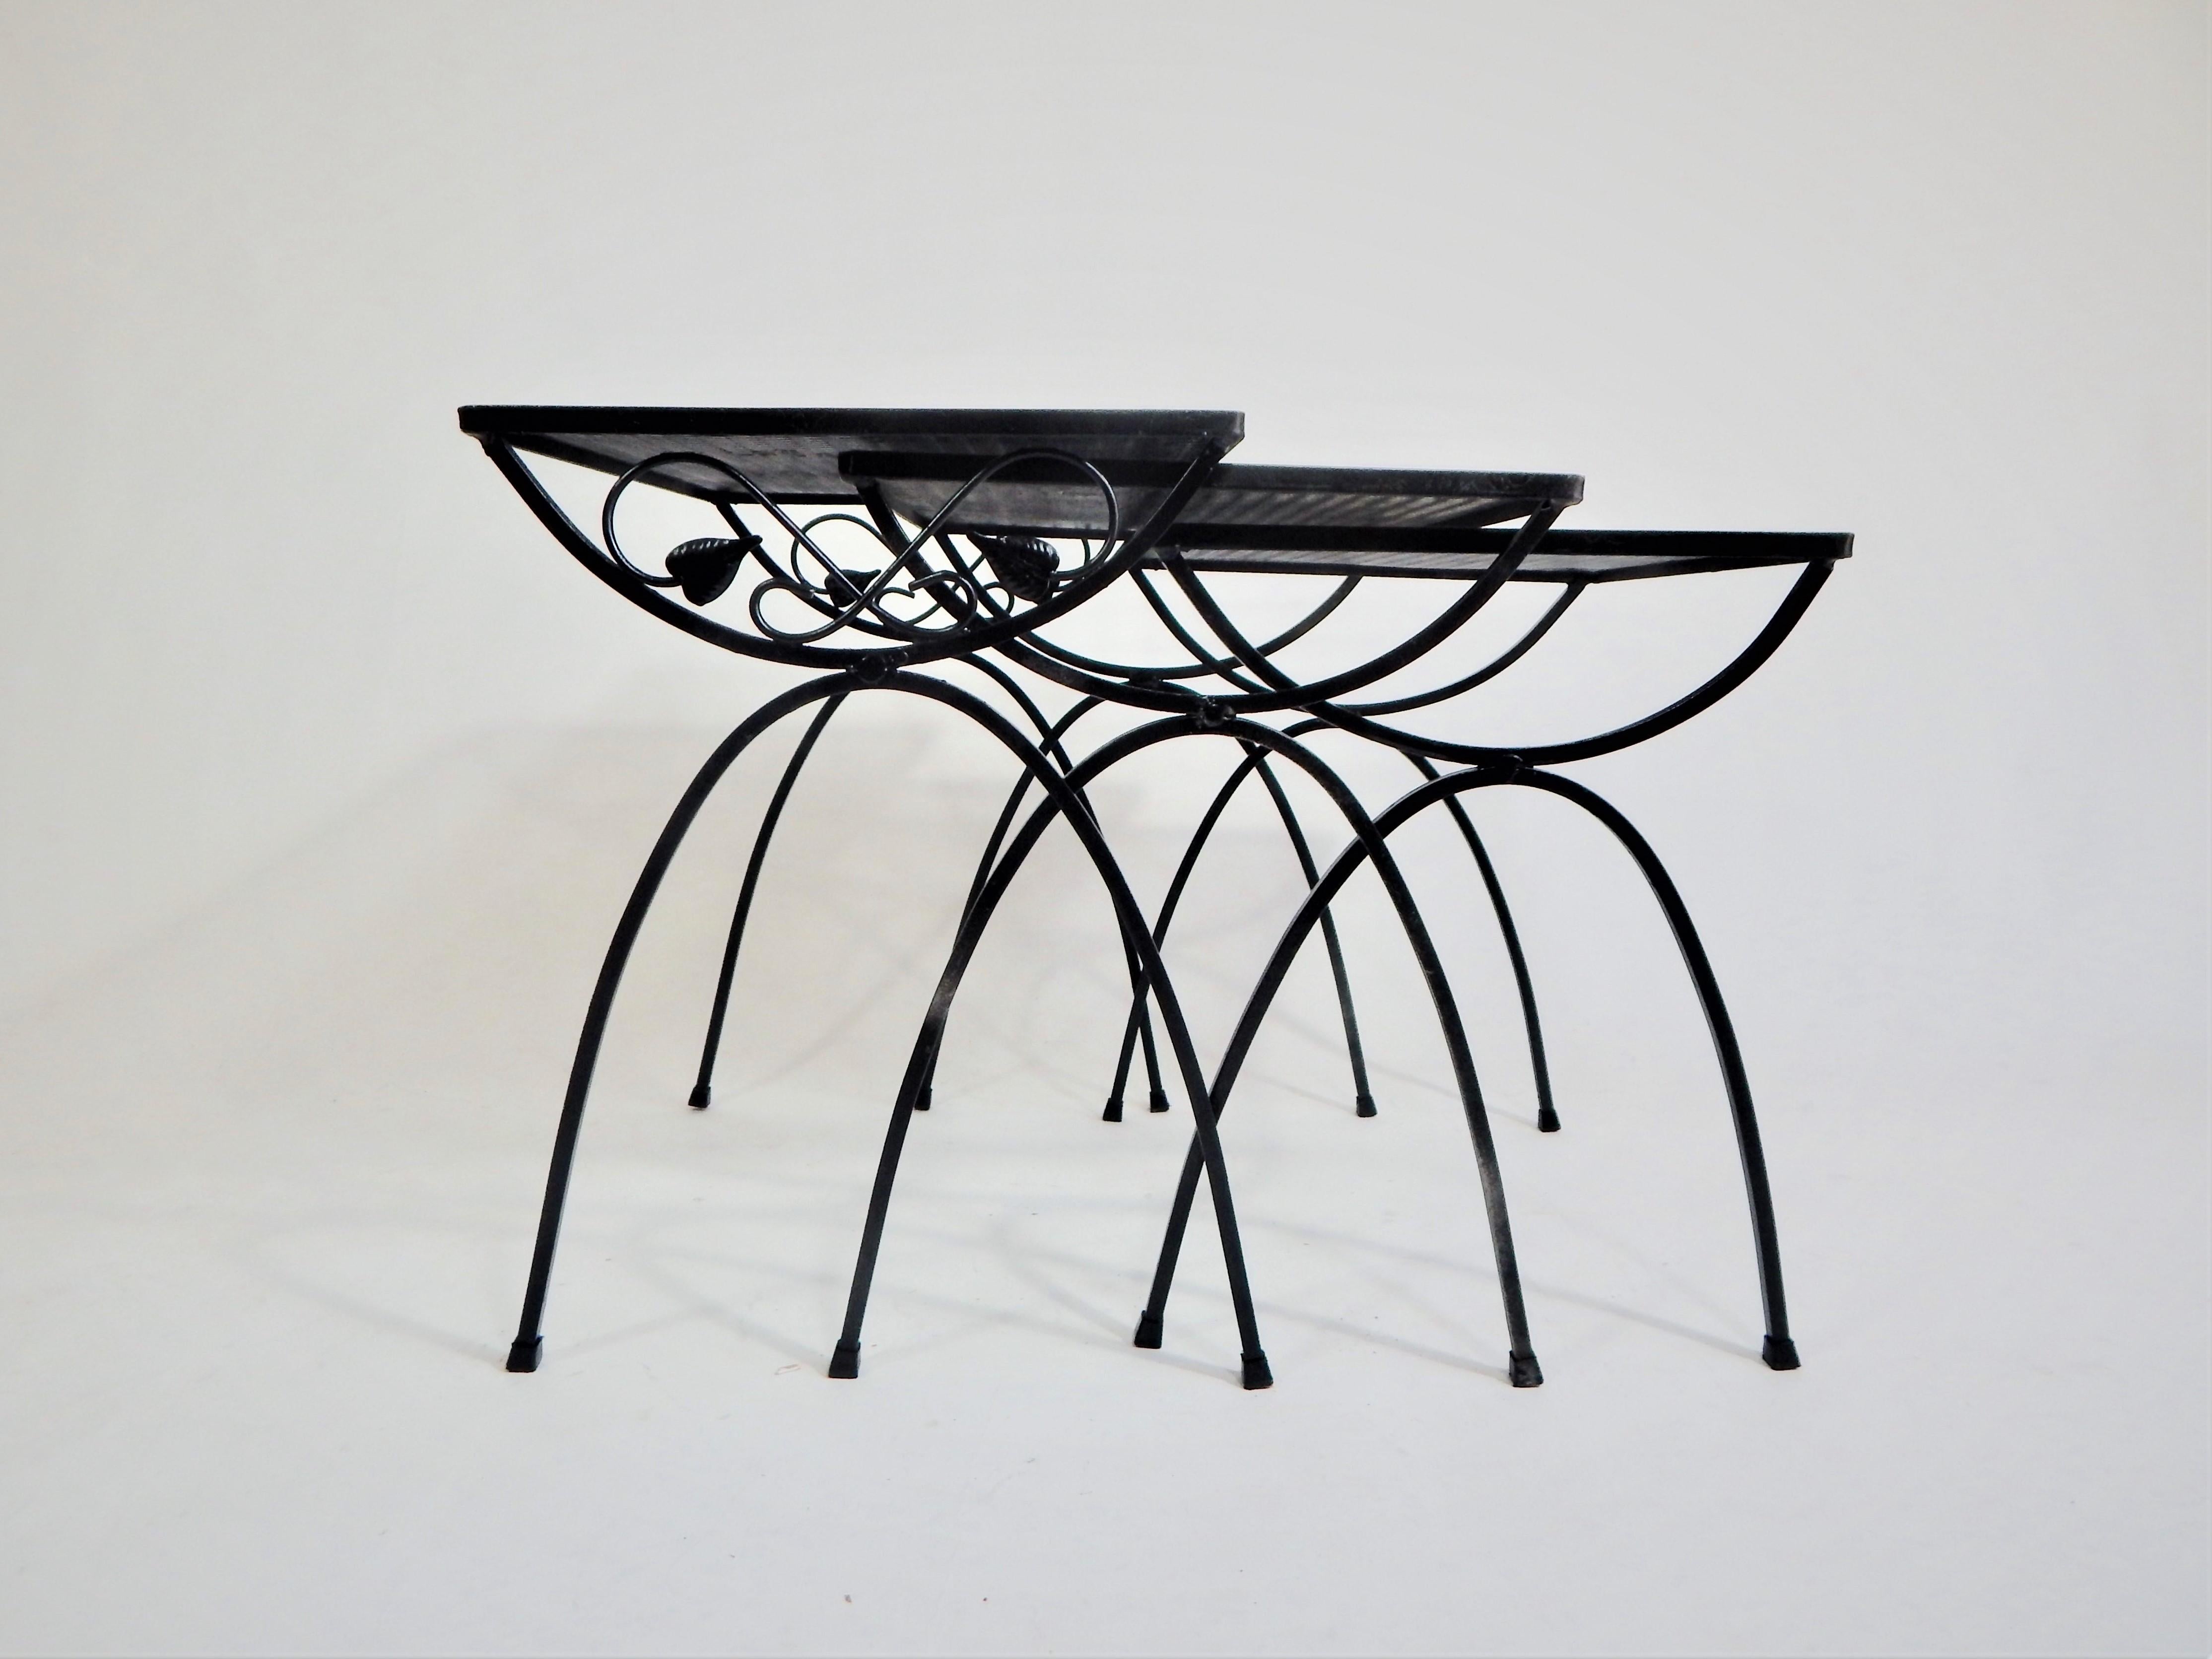 Midcentury set of three Salterini wrought iron nesting or stacking tables. Graduating sizes. Indoor Outdoor Patio Garden.  
Excellent condition.
Dimensions in inches:
Large table H 19.75, W 20.5, D 16
Medium table H 19, W 18.25, D 15.25
Small table